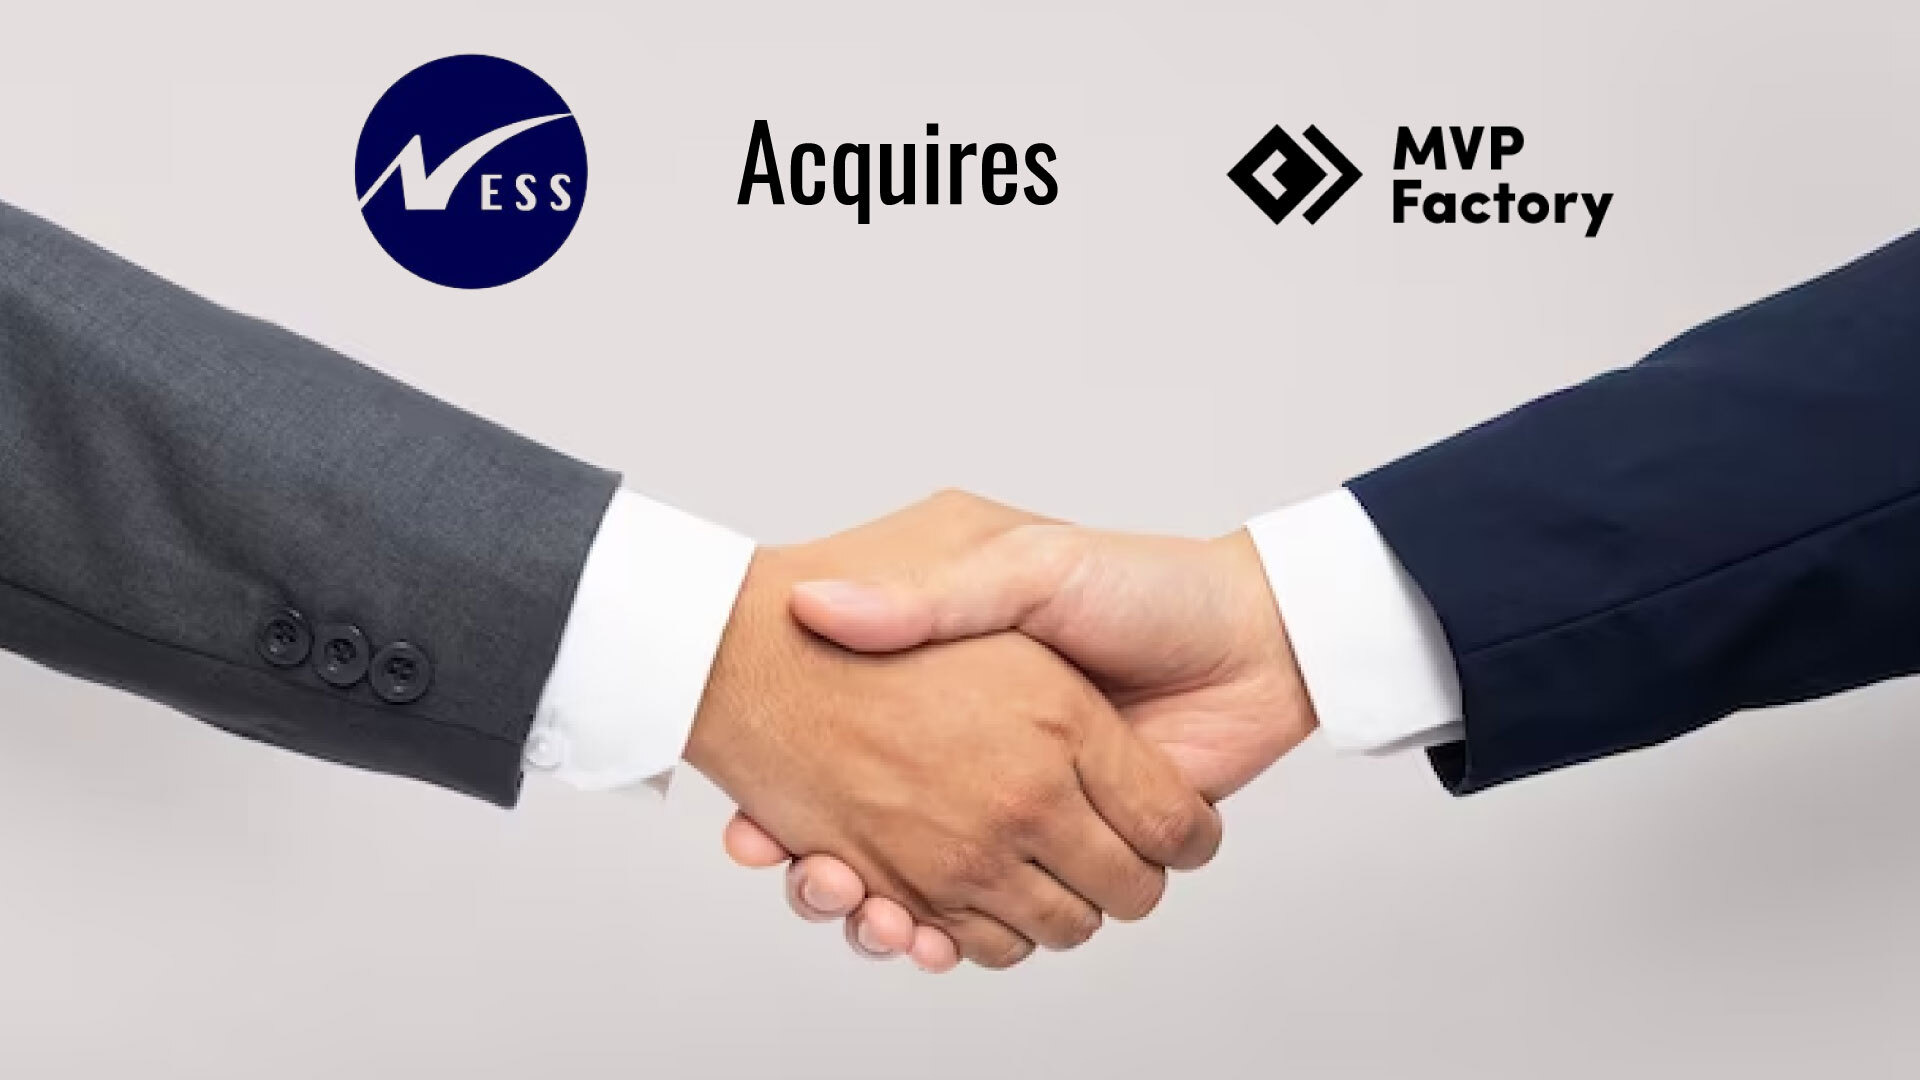 NESS DIGITAL ENGINEERING ACQUIRES MVP FACTORY - A LEADING GERMAN HEADQUARTERED PRODUCT DESIGN, DIGITAL INNOVATION AND VENTURE BUILDER 